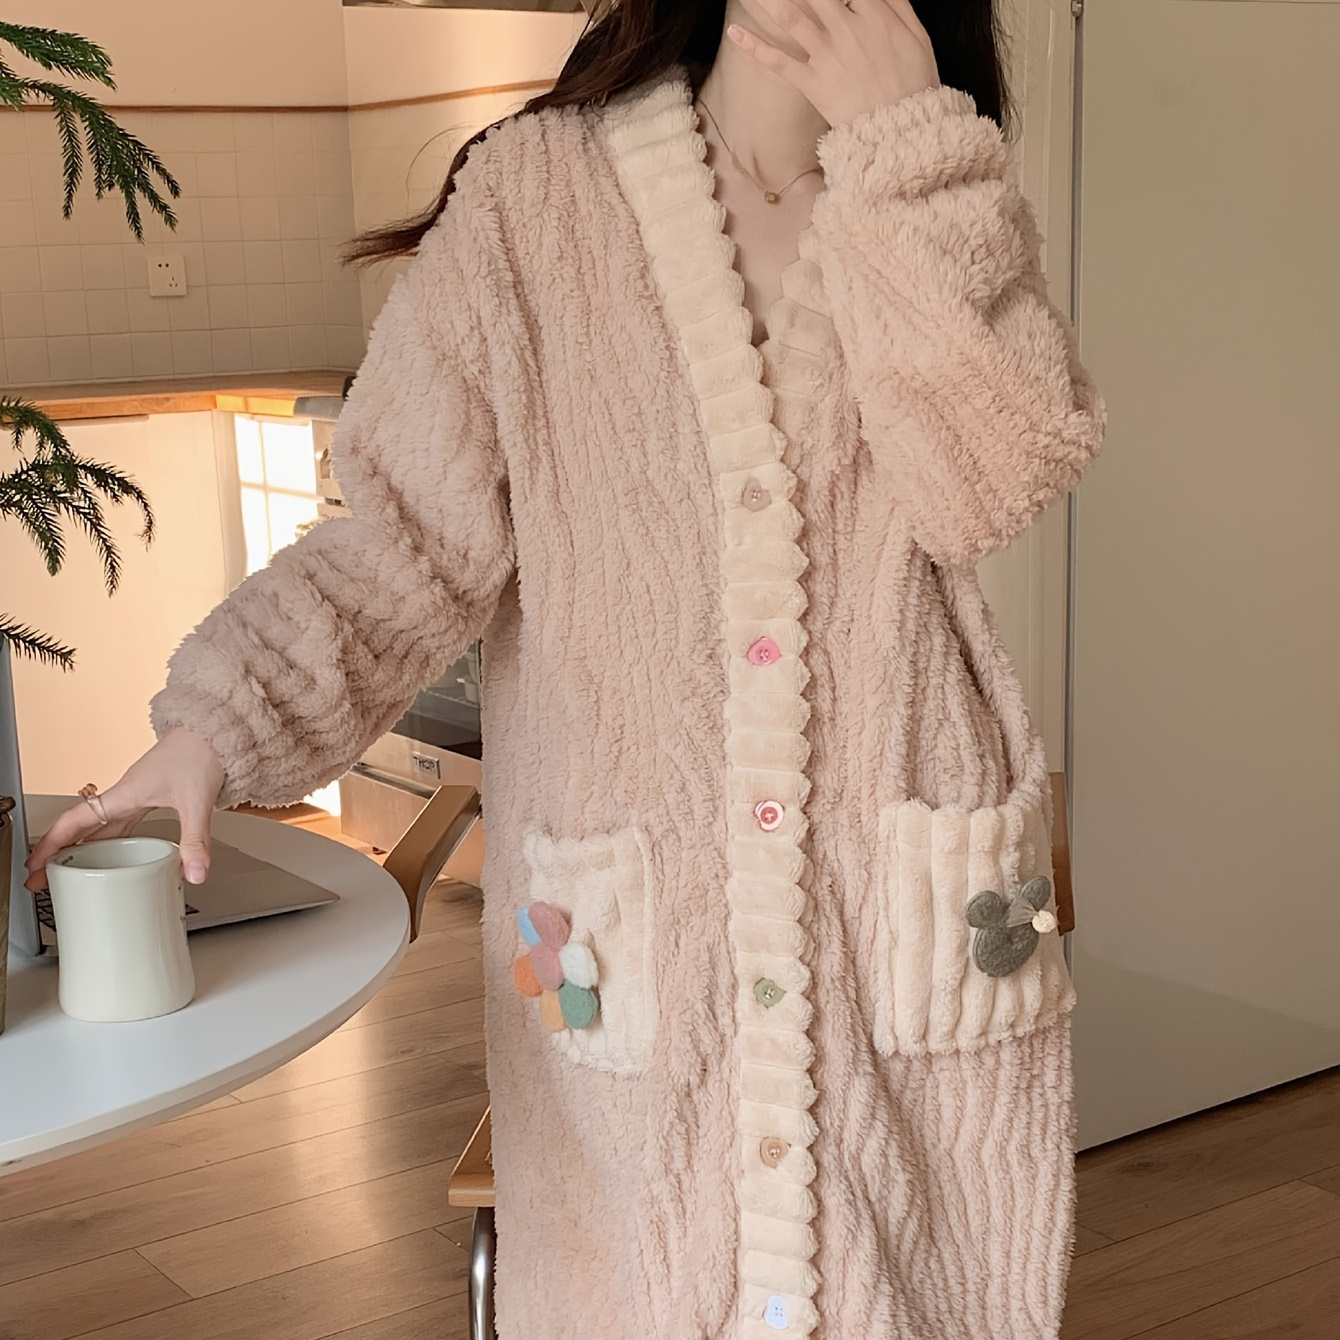 

Women's Mid-length Coral Fleece Robe With Pockets, Button-up V-neck, Thick Plush Sleepwear, Cozy Fluffy Sweet Sleepwear, Perfect For Fall & Winter